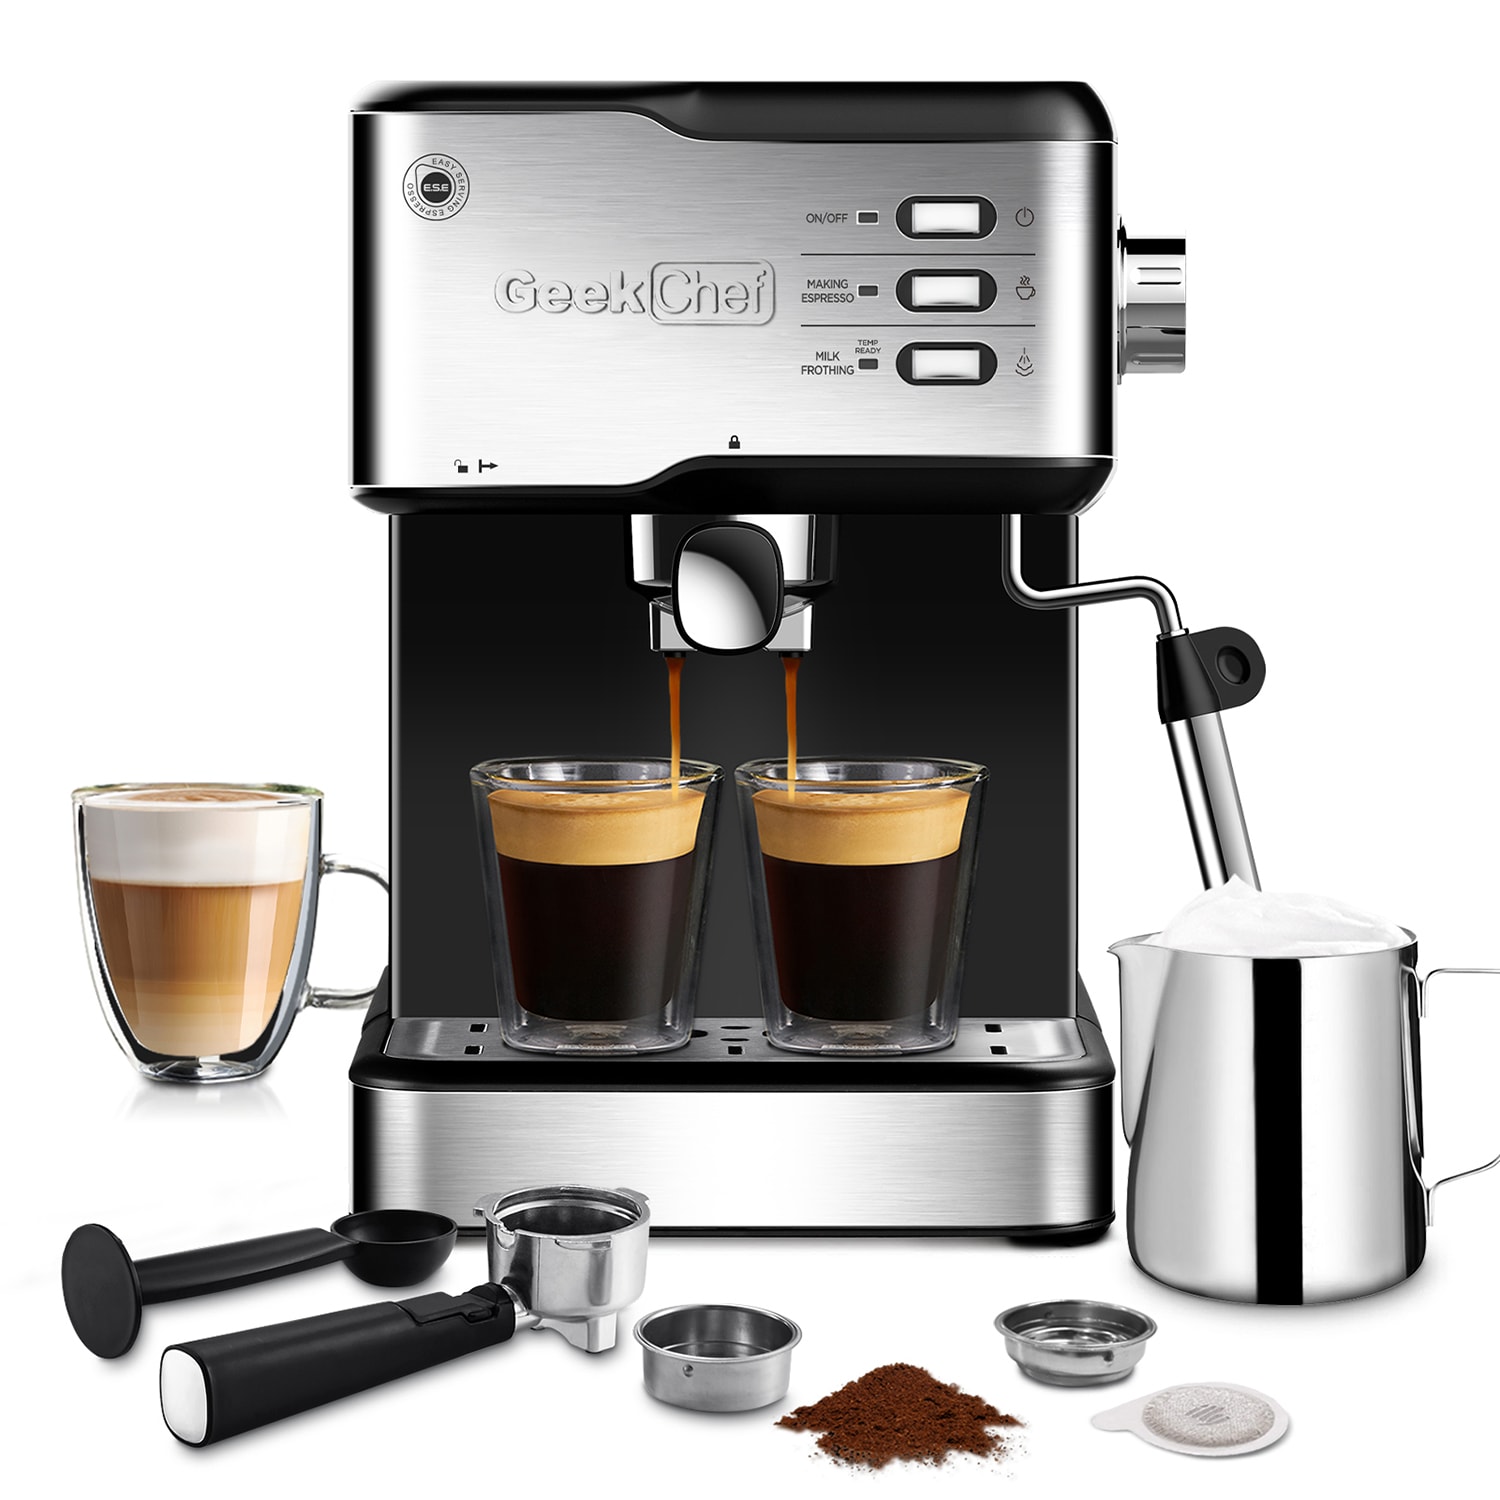 Geek Chef Espresso Machine 20 Bar, Professional Espresso Coffee Maker with  Automatic Milk Frother & ESE POD, Semi-Automatic Espresso Machines for